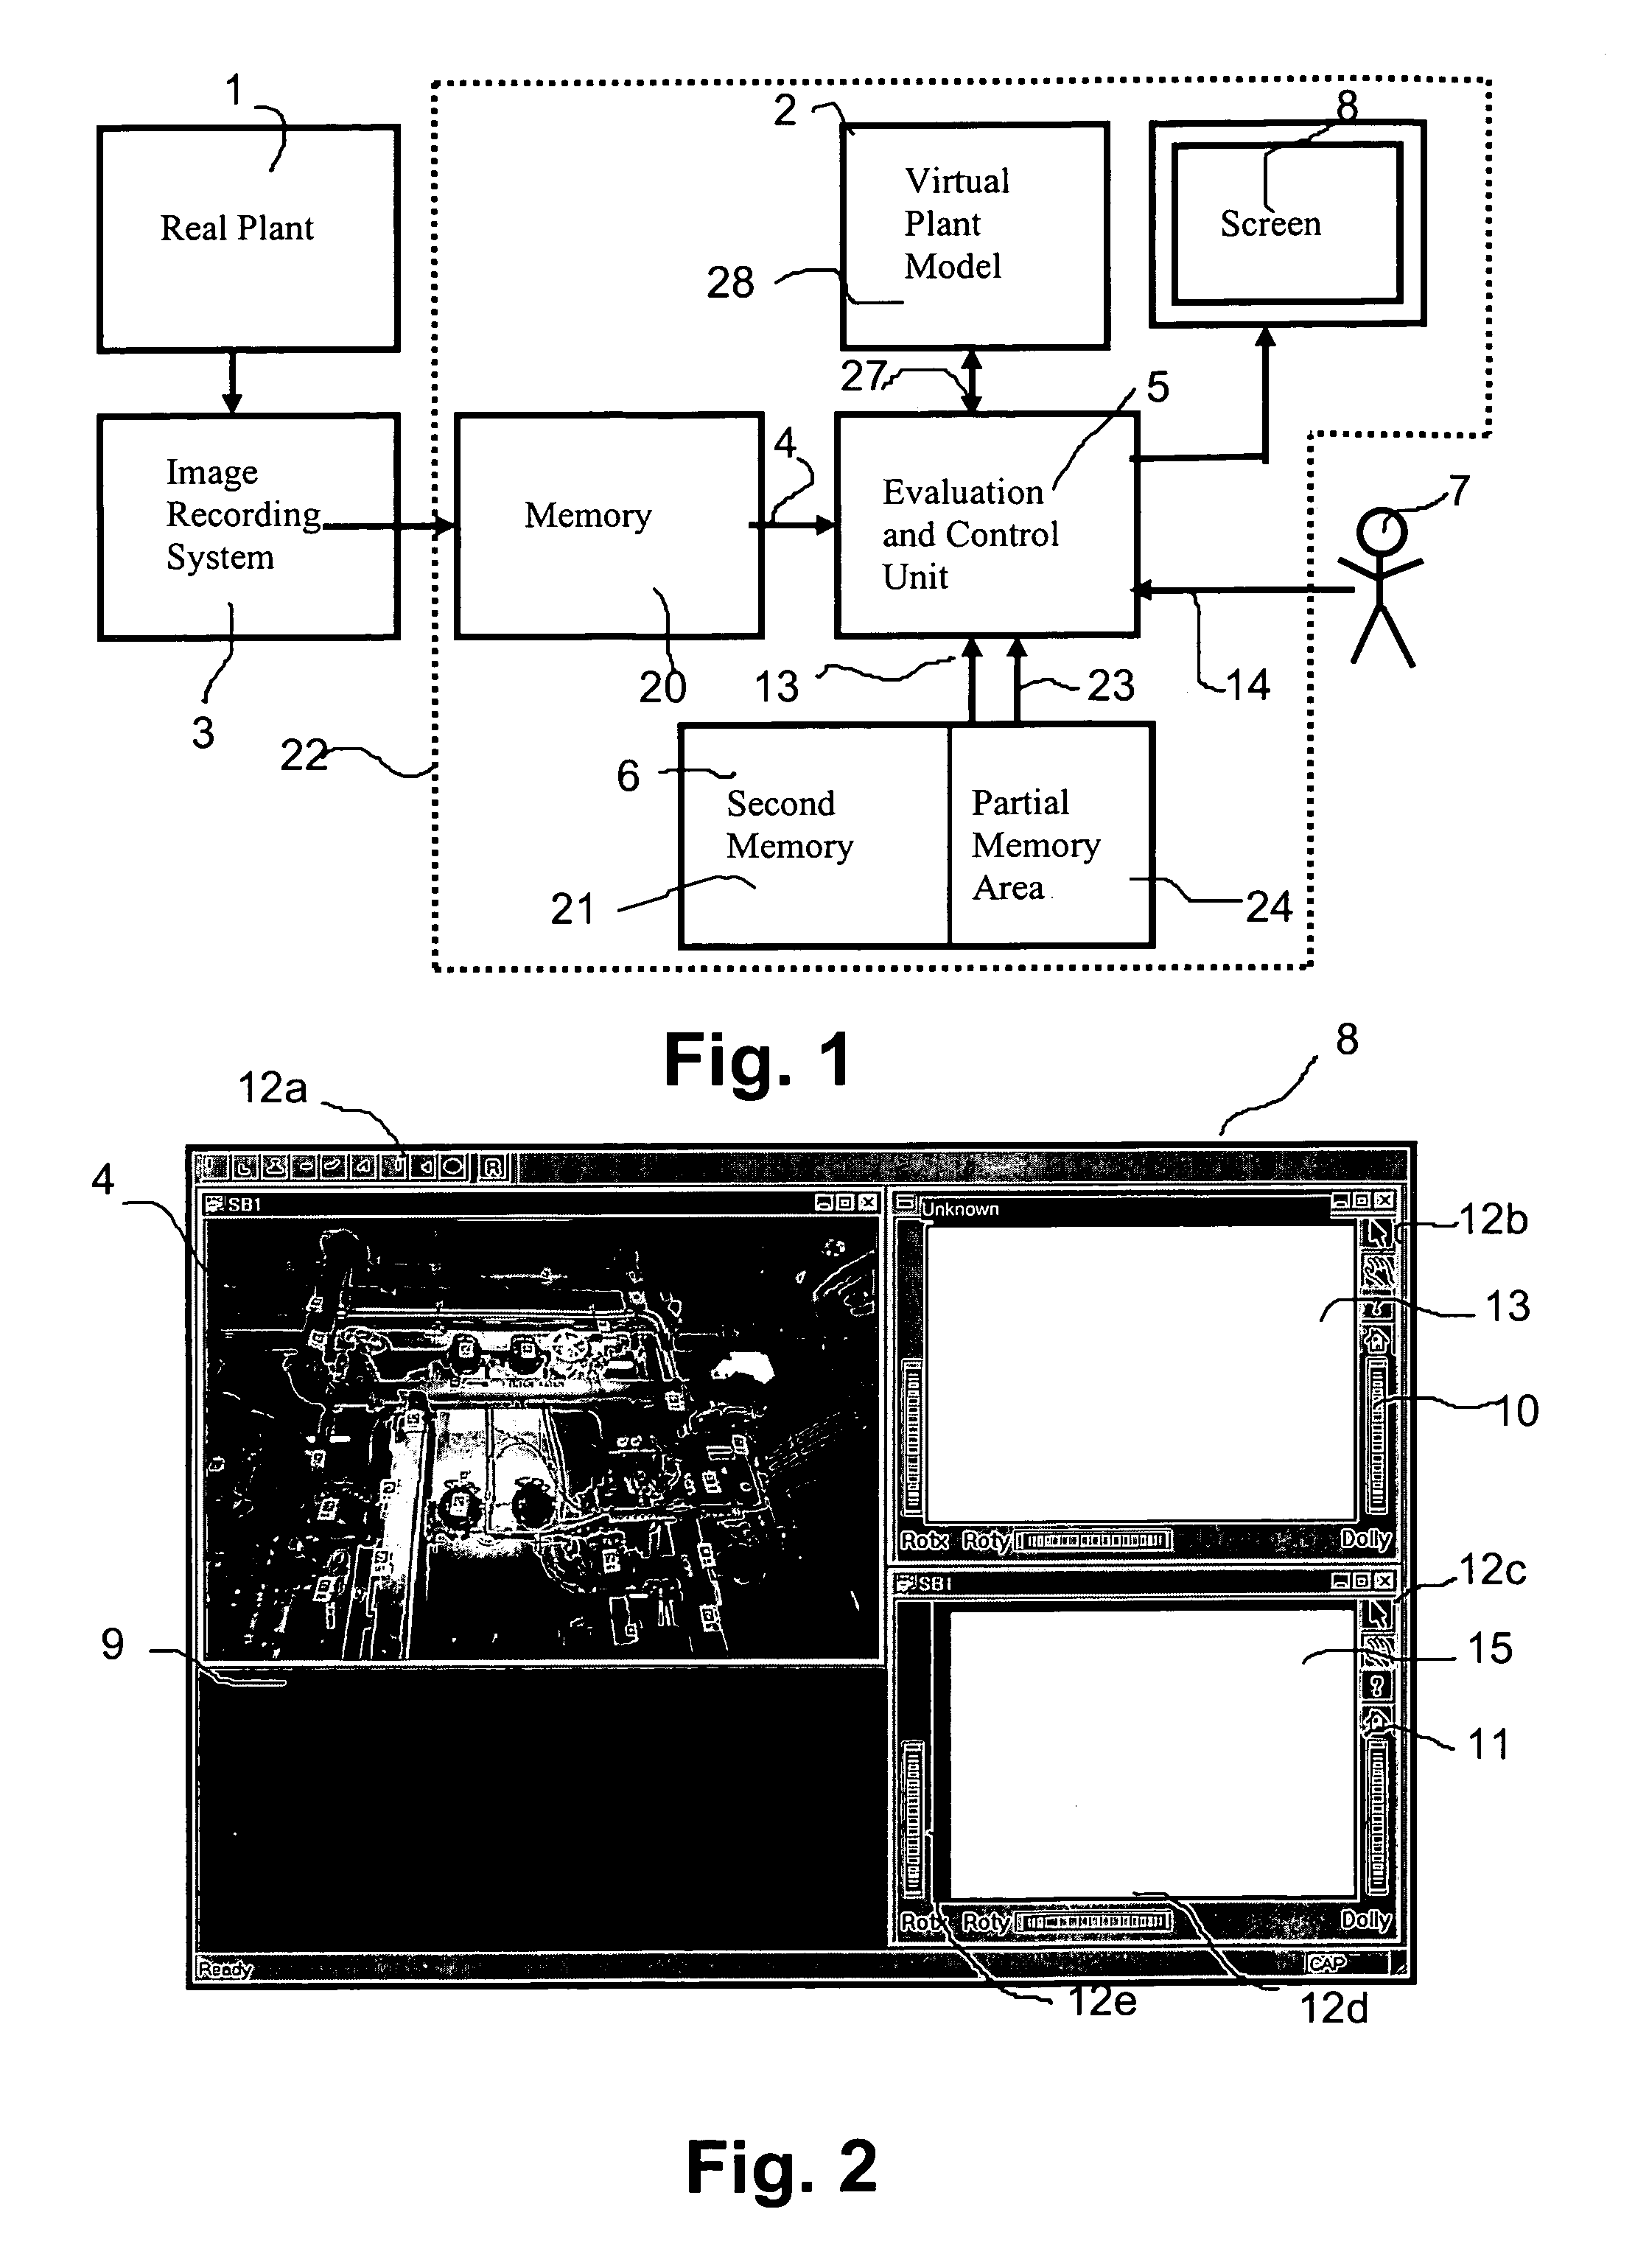 Device and method for generating a virtual model of an installation